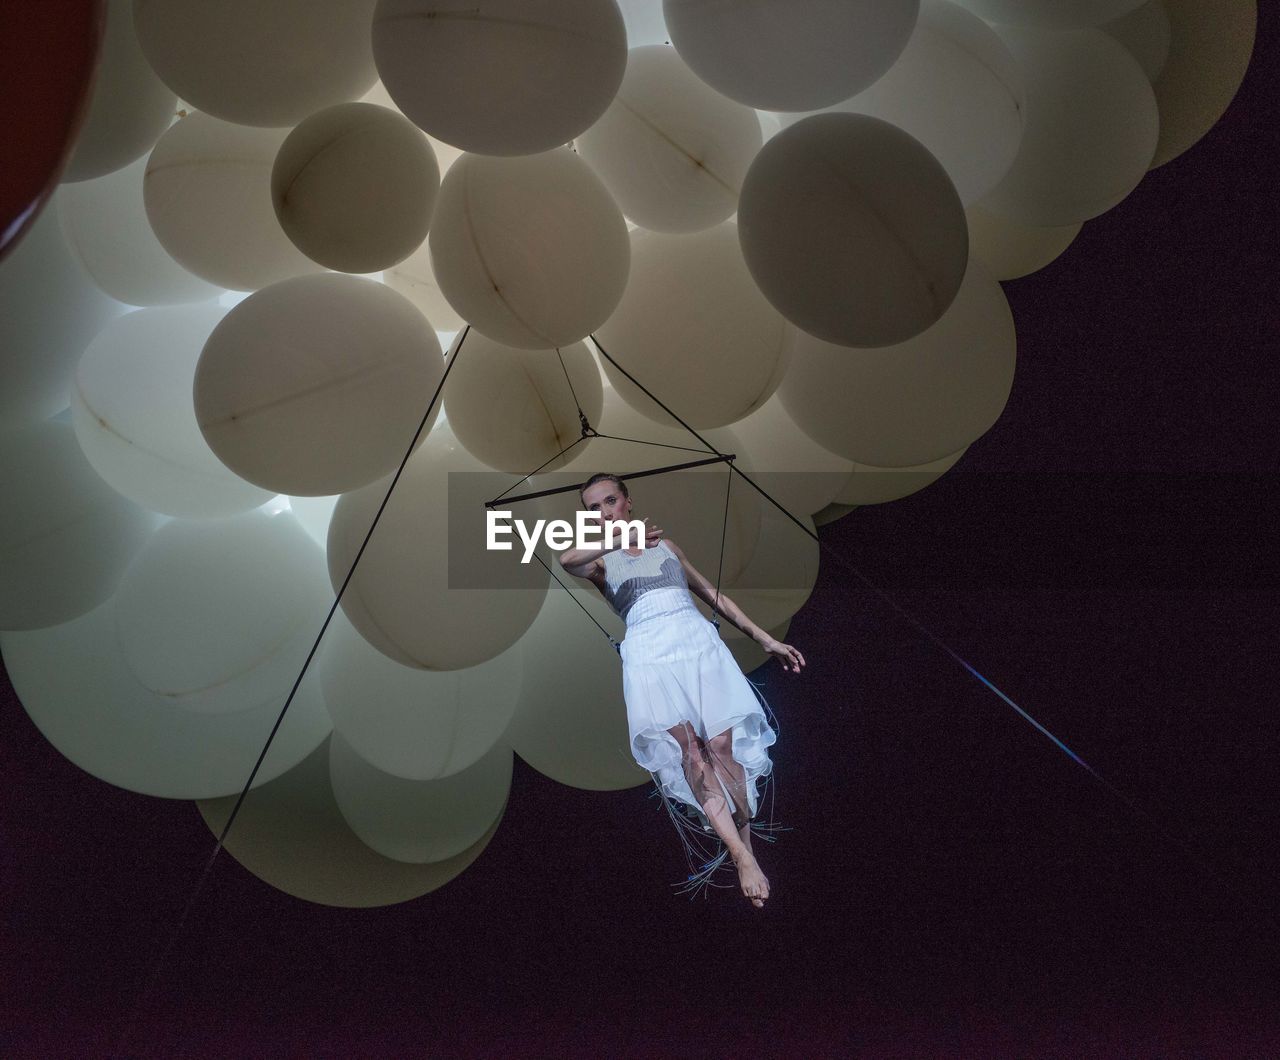 Digital composite image of woman with balloon balloons